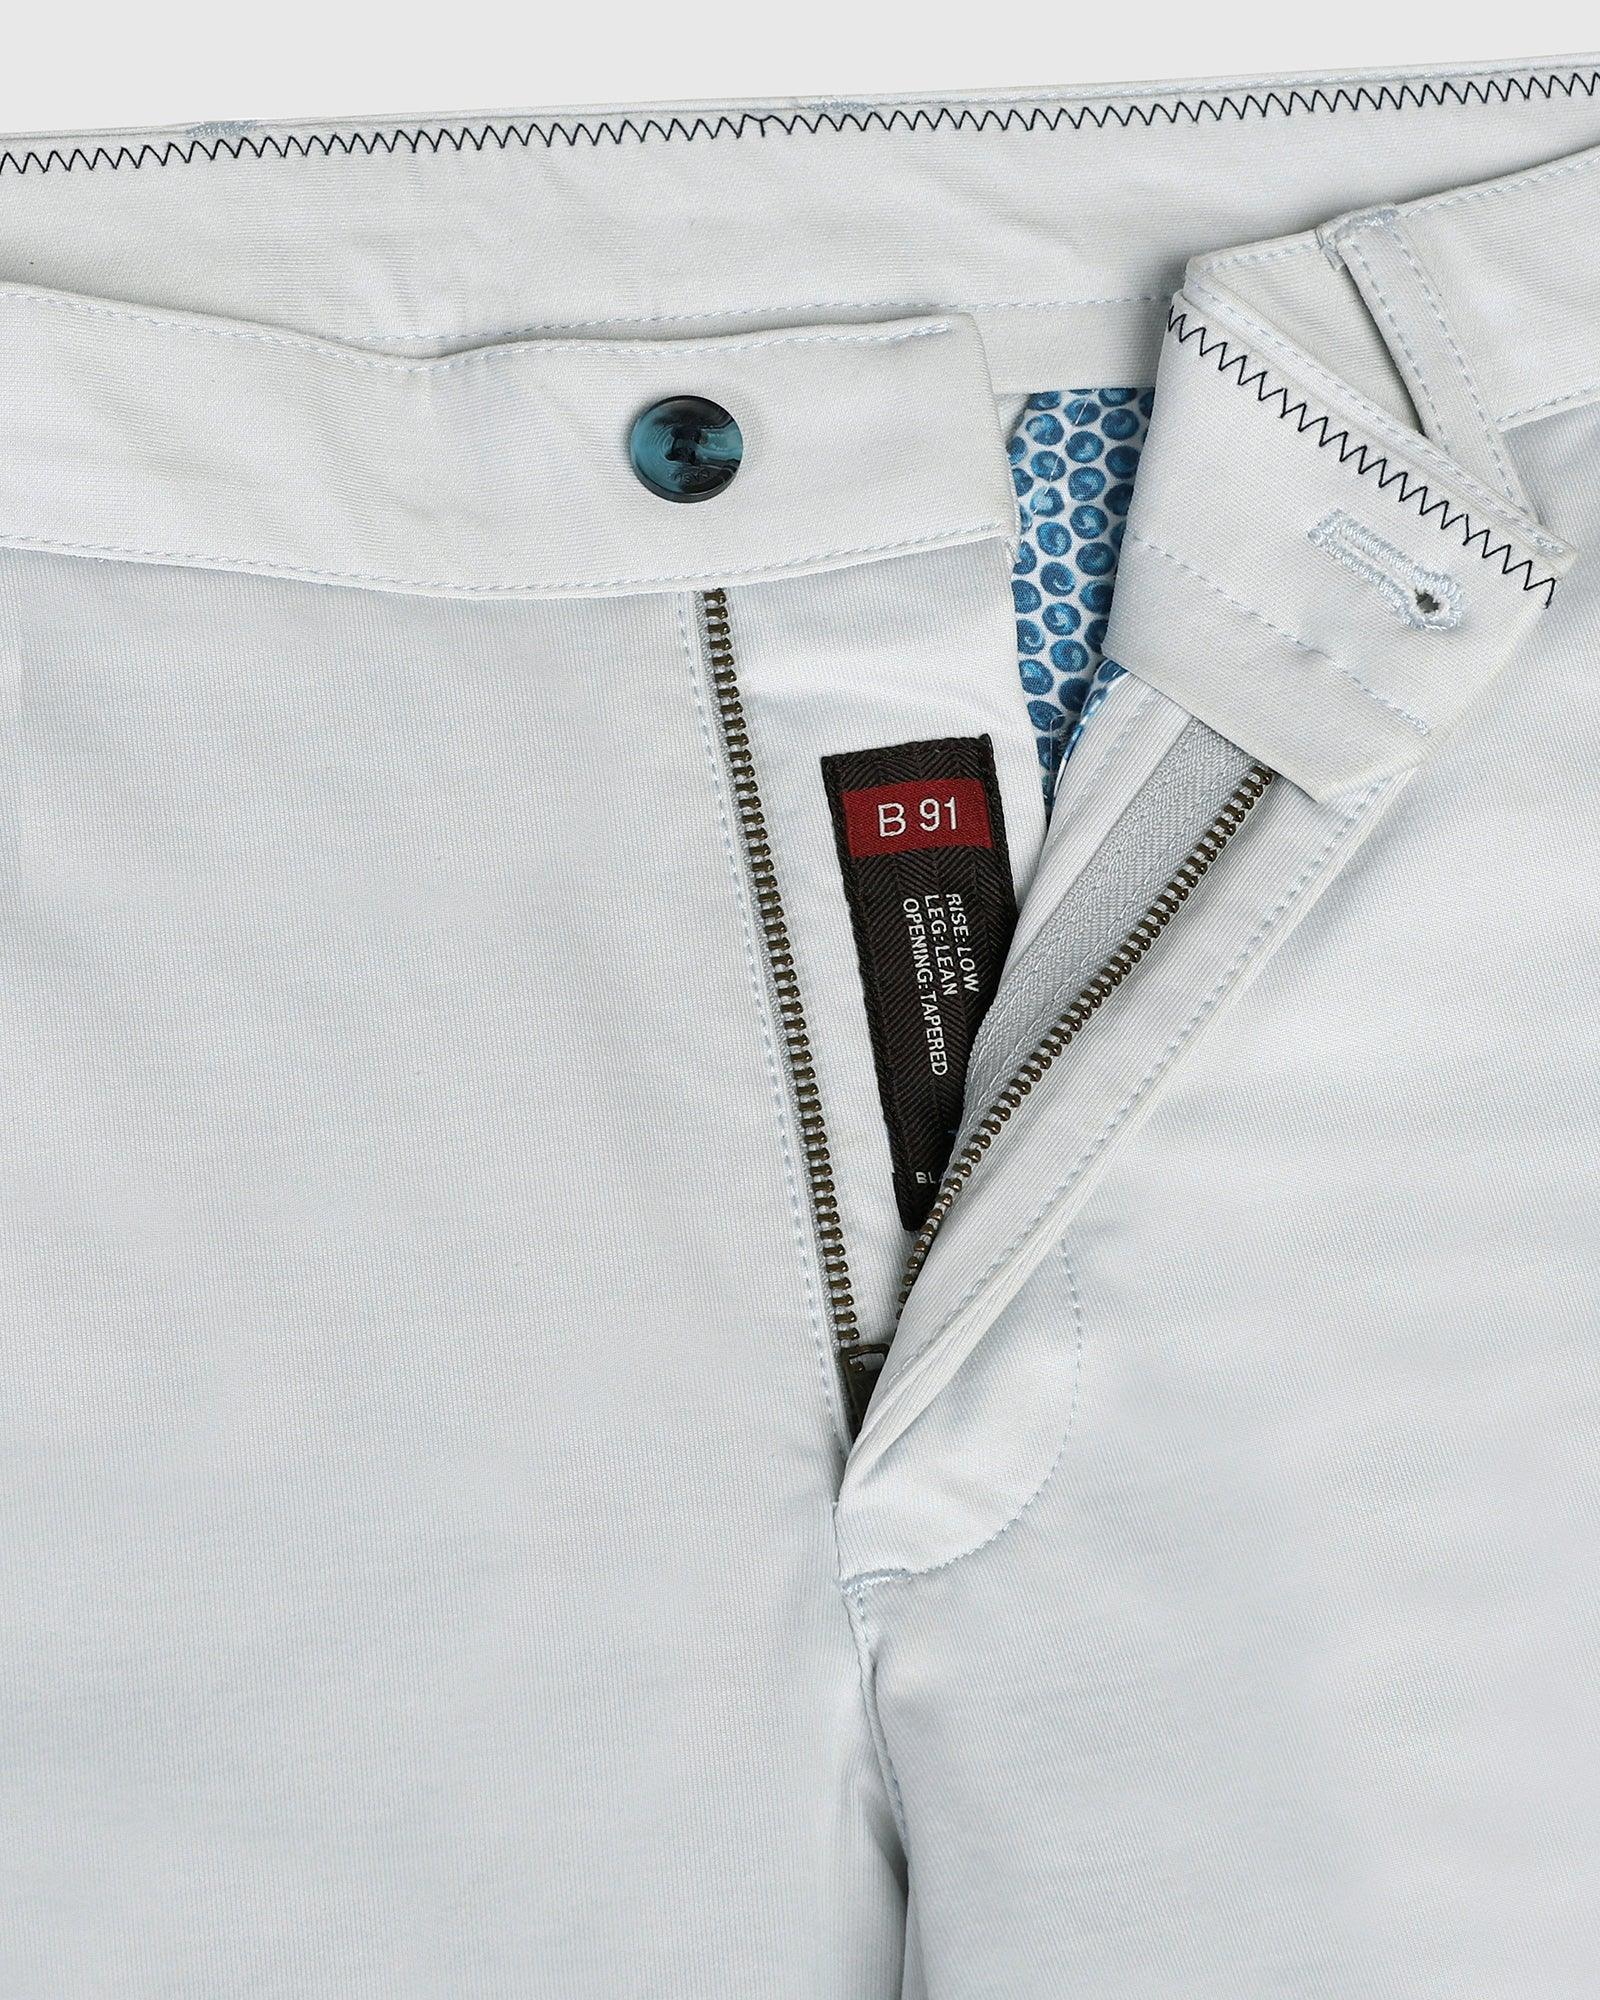 Slim Fit B-91 Casual Light Blue Solid Khakis - Hector